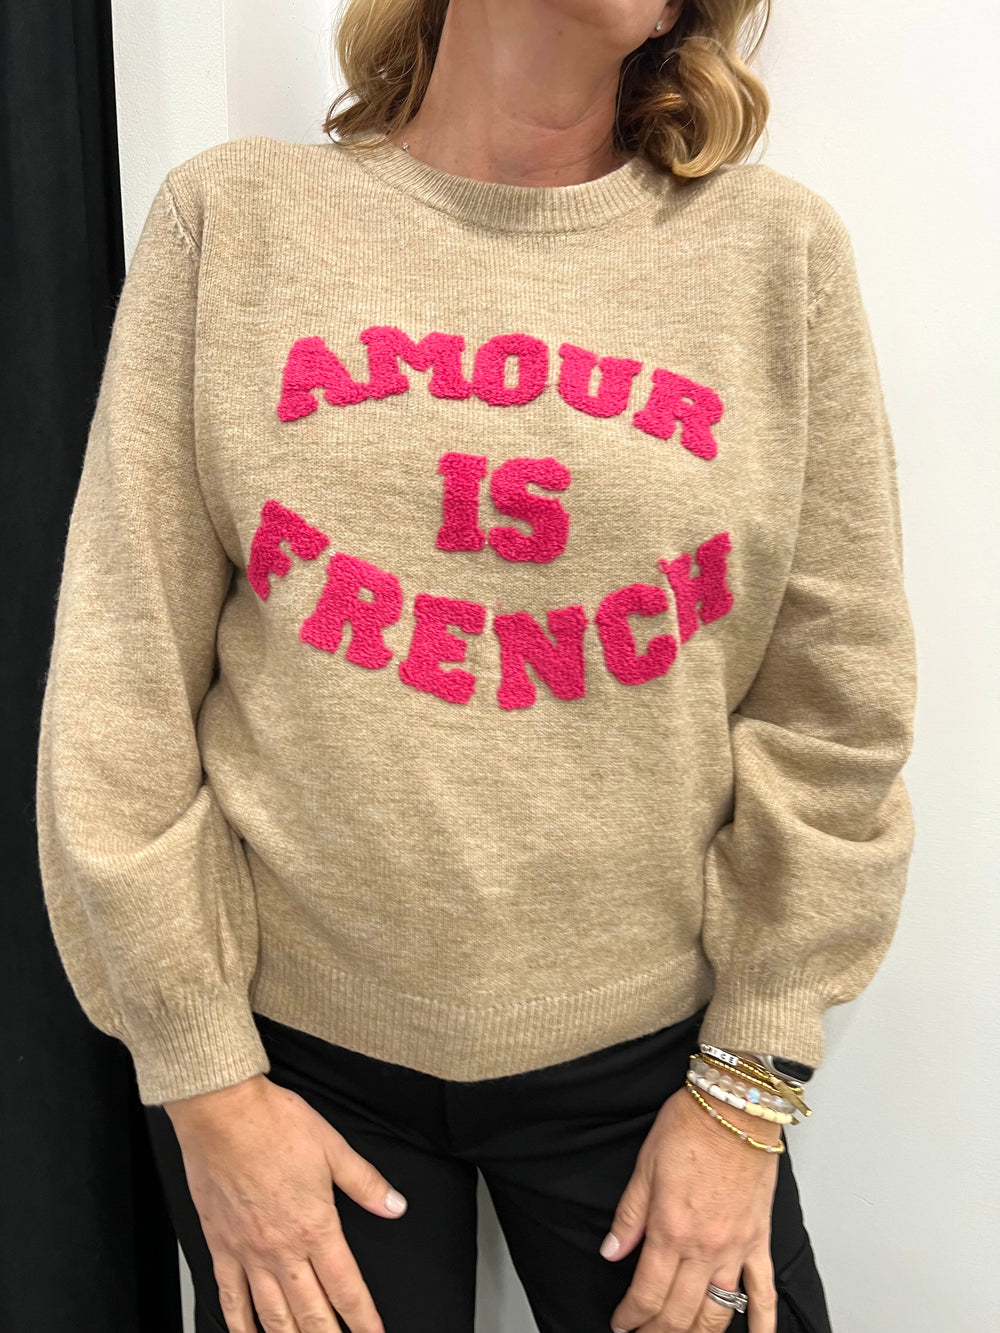 AMOUR IS FRENCH TAN WINTER SWEATER